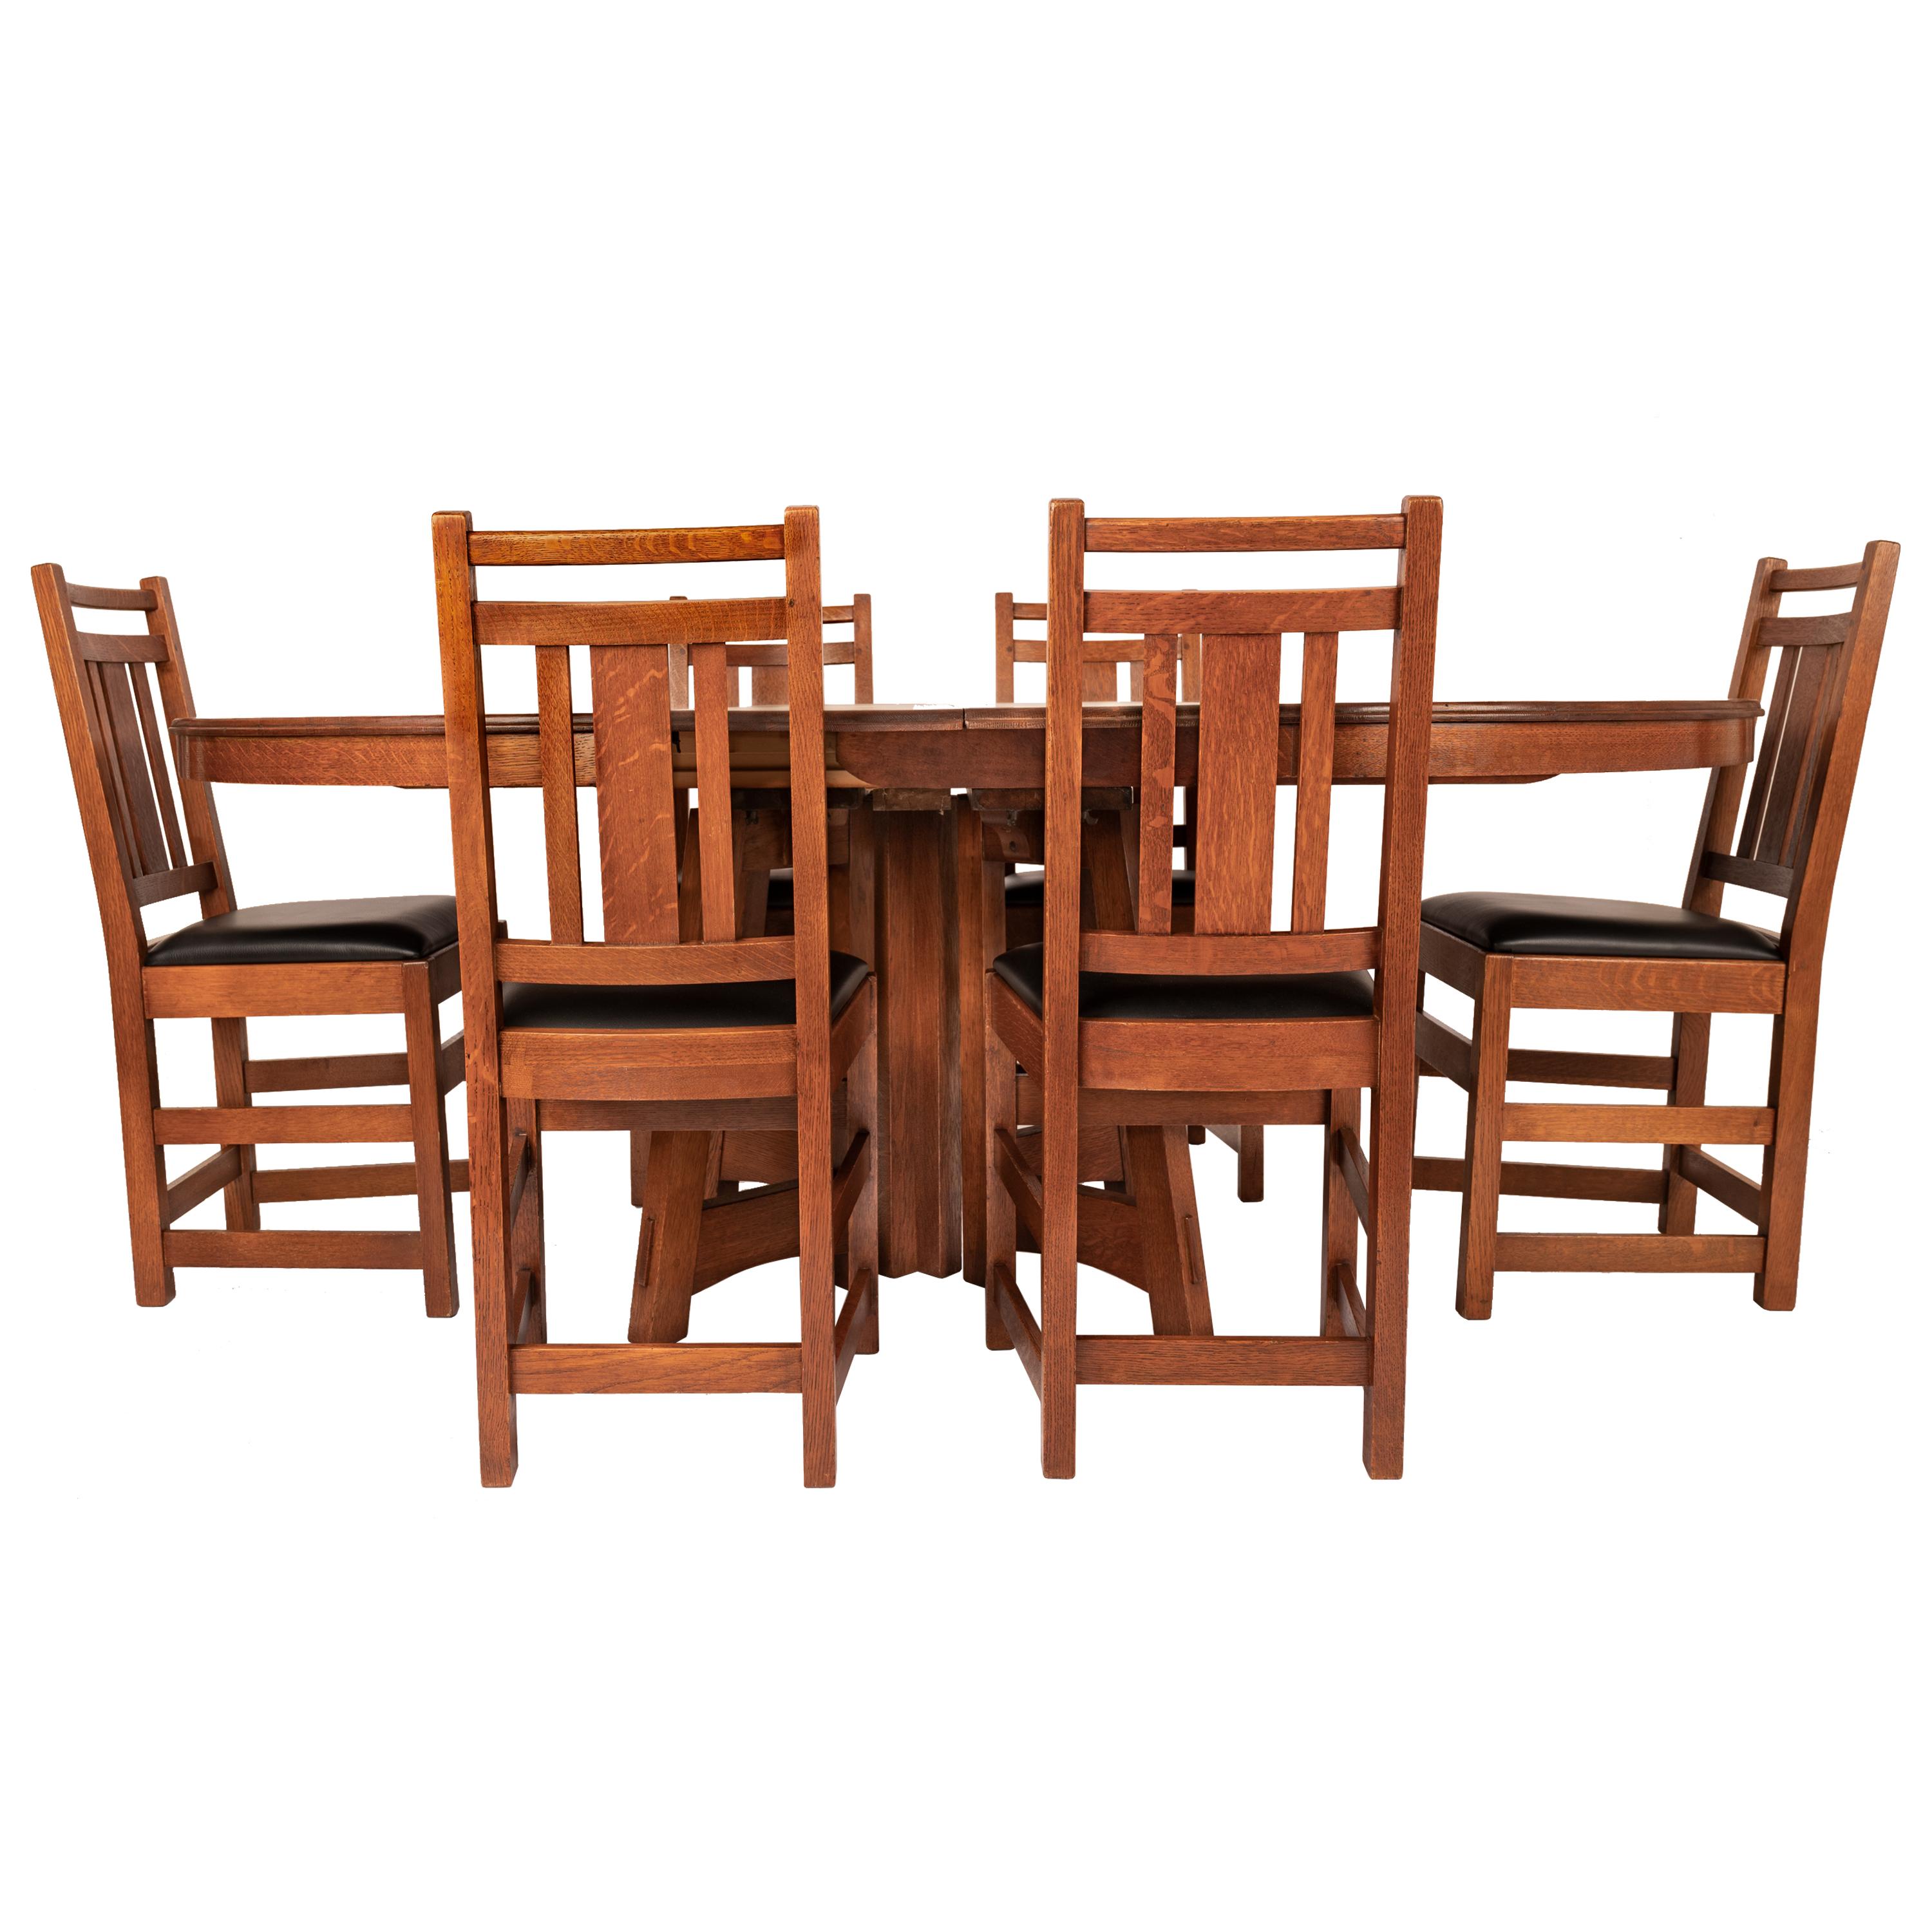 A very good antique American Mission/Arts & Crafts dining set by Charles Limbert, branded marks, circa 1905.
The set comprising a circular table model # 1408, with four original leaves and six original chairs, made from quarter sawn oak throughout.